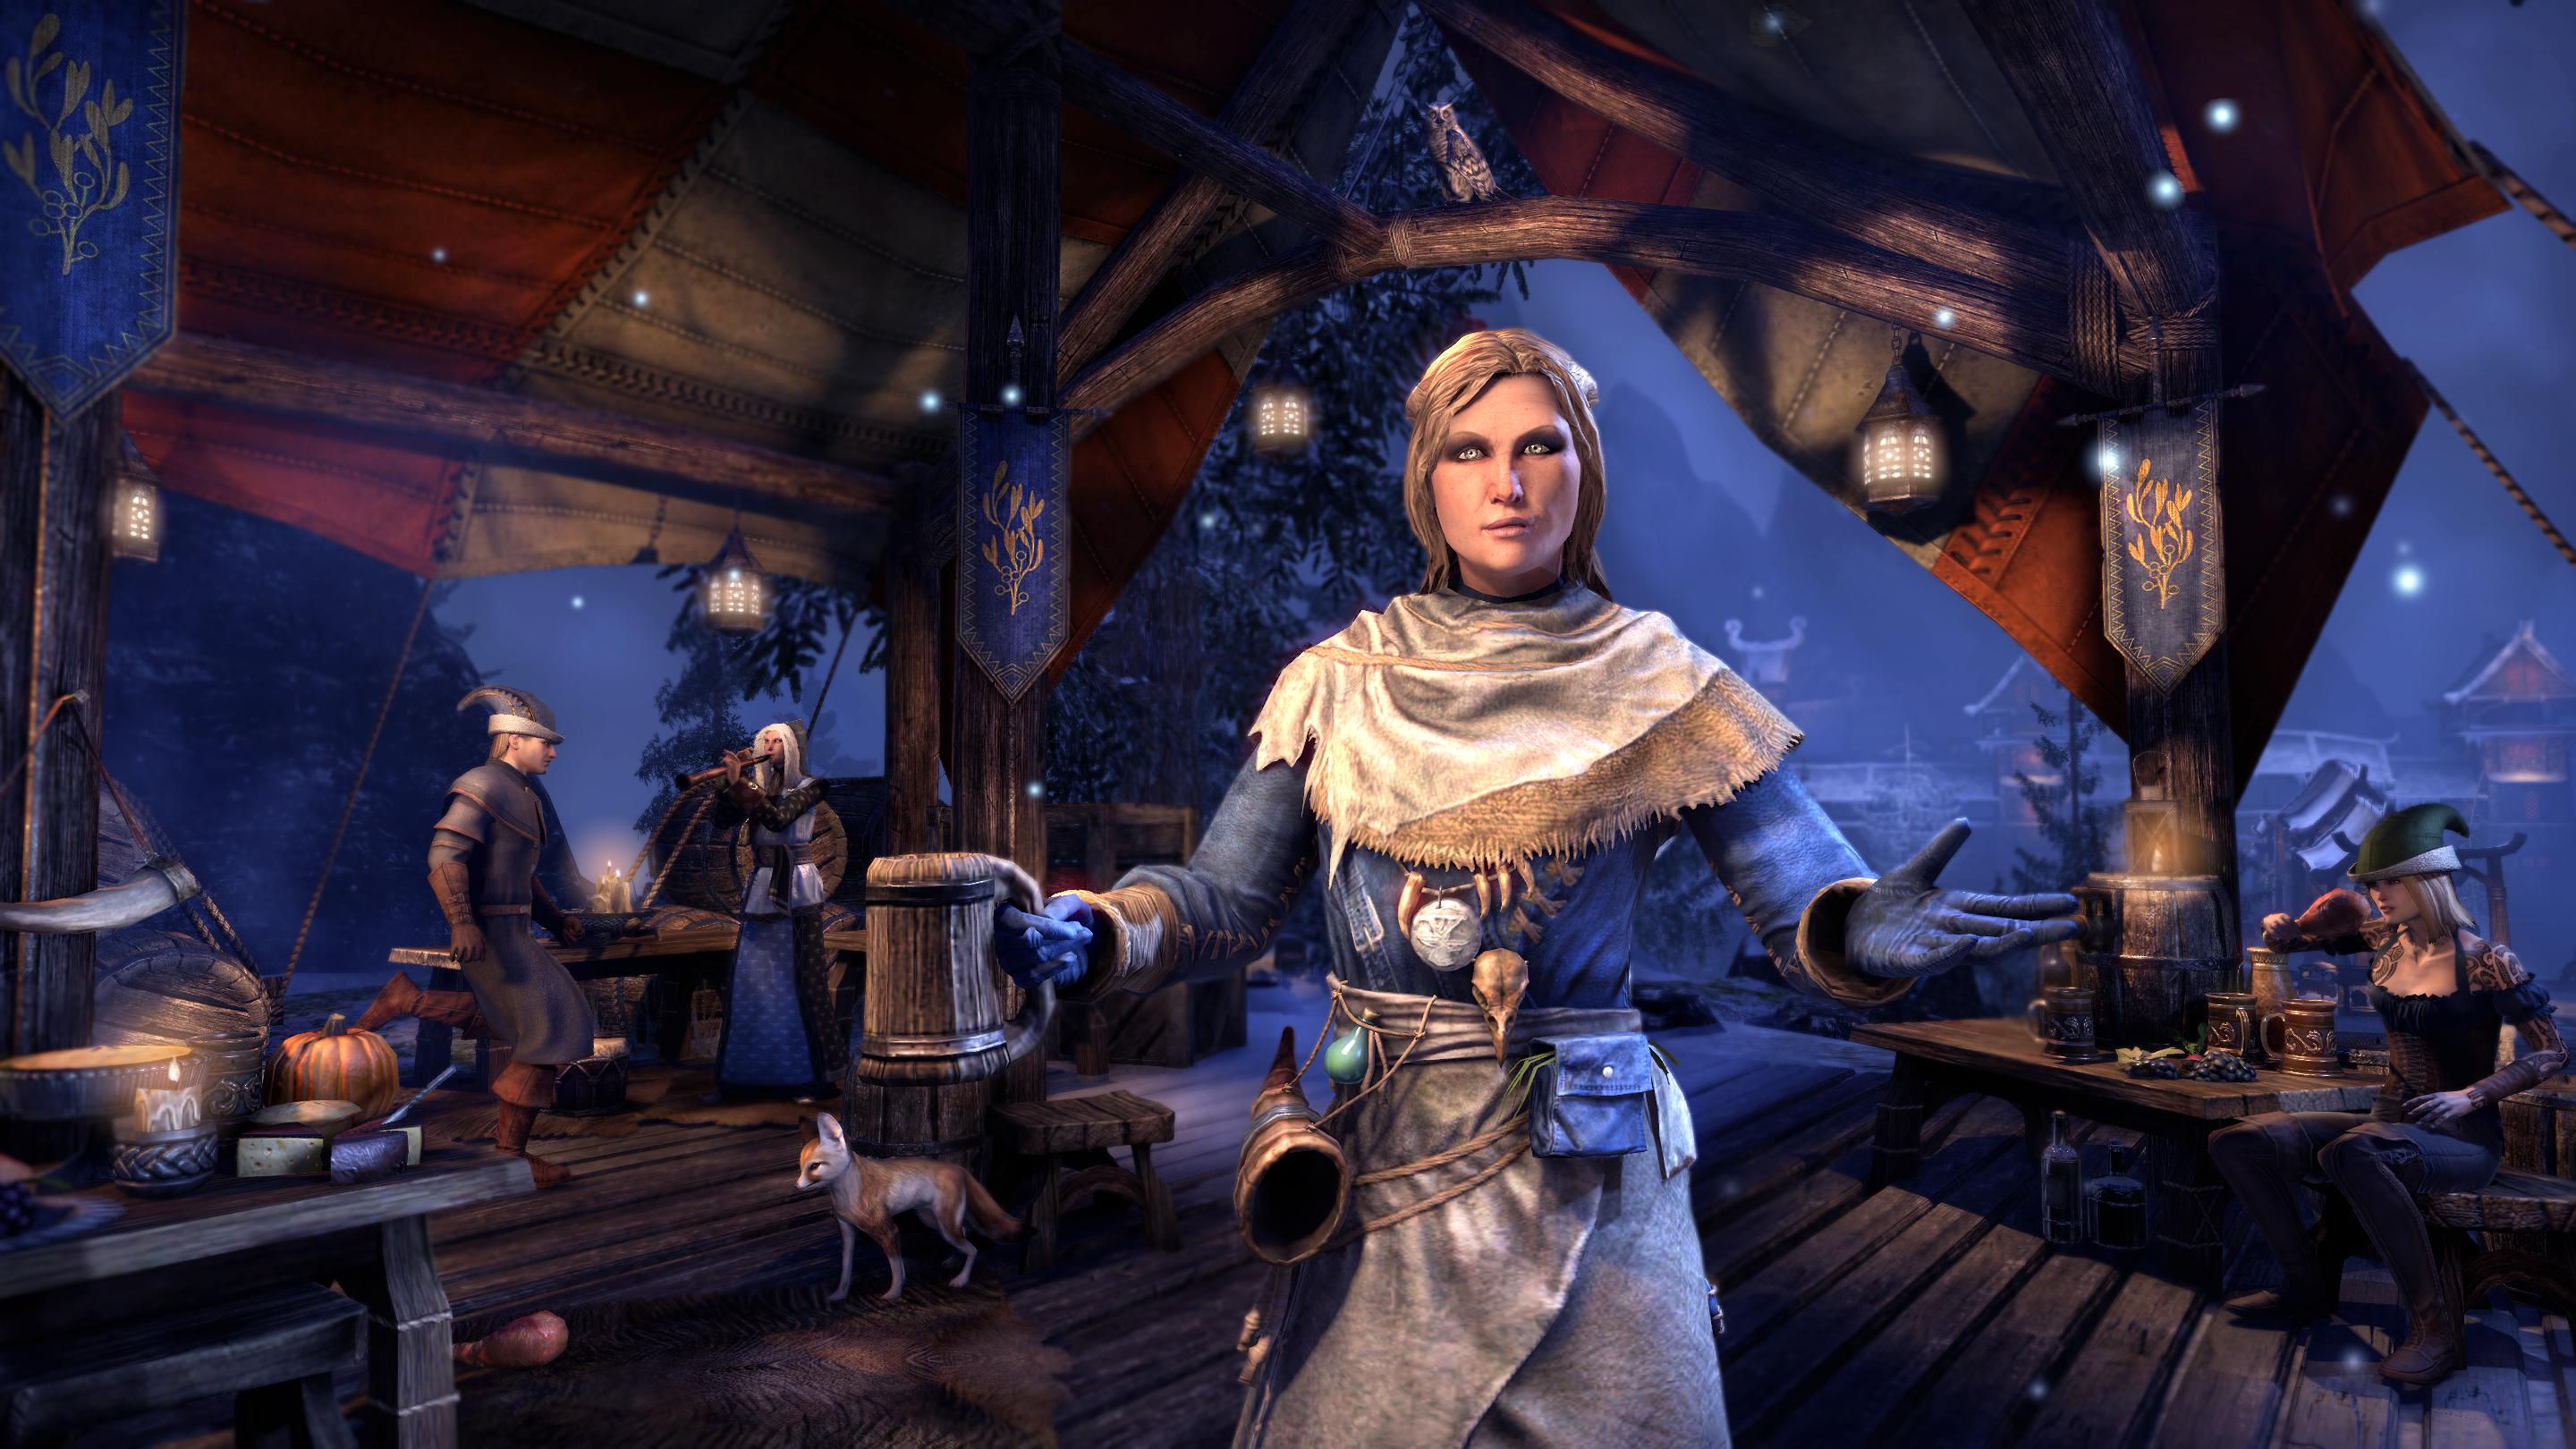 GIft Tickets And Receive Crown Crates In The Elder Scrolls Online Promotion